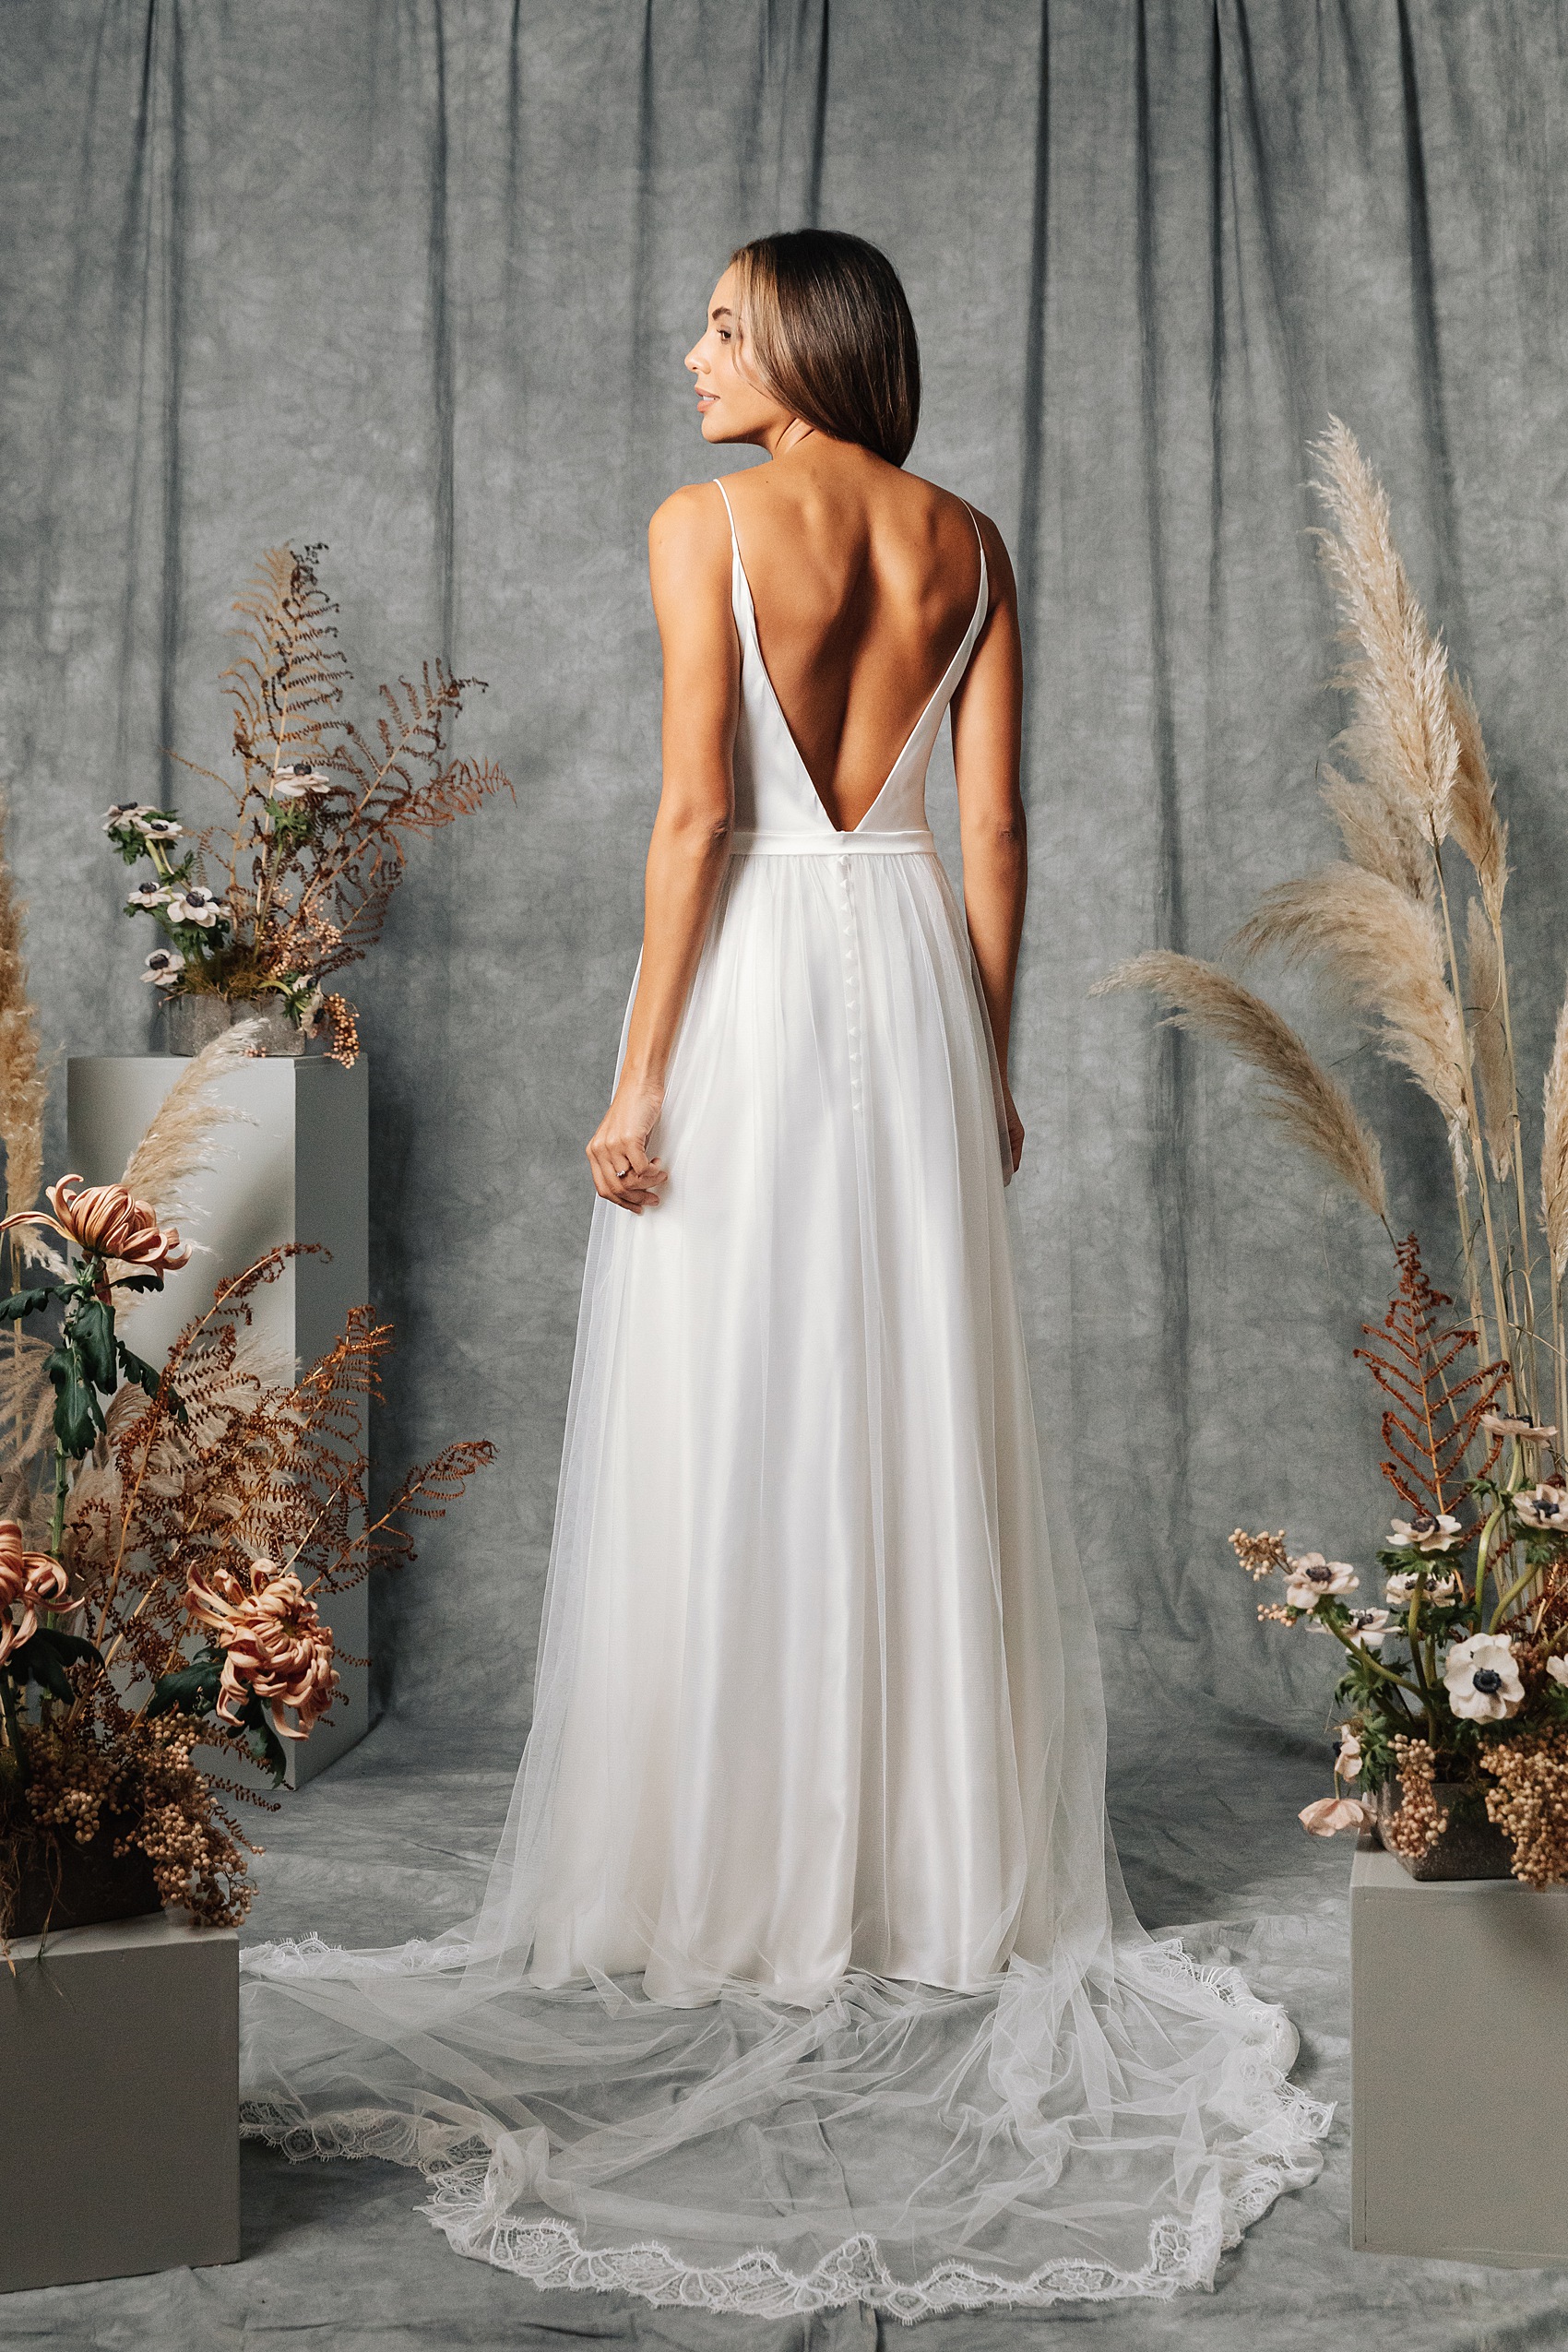 Elegant sustainable backless wedding dress by Kate Beaumont